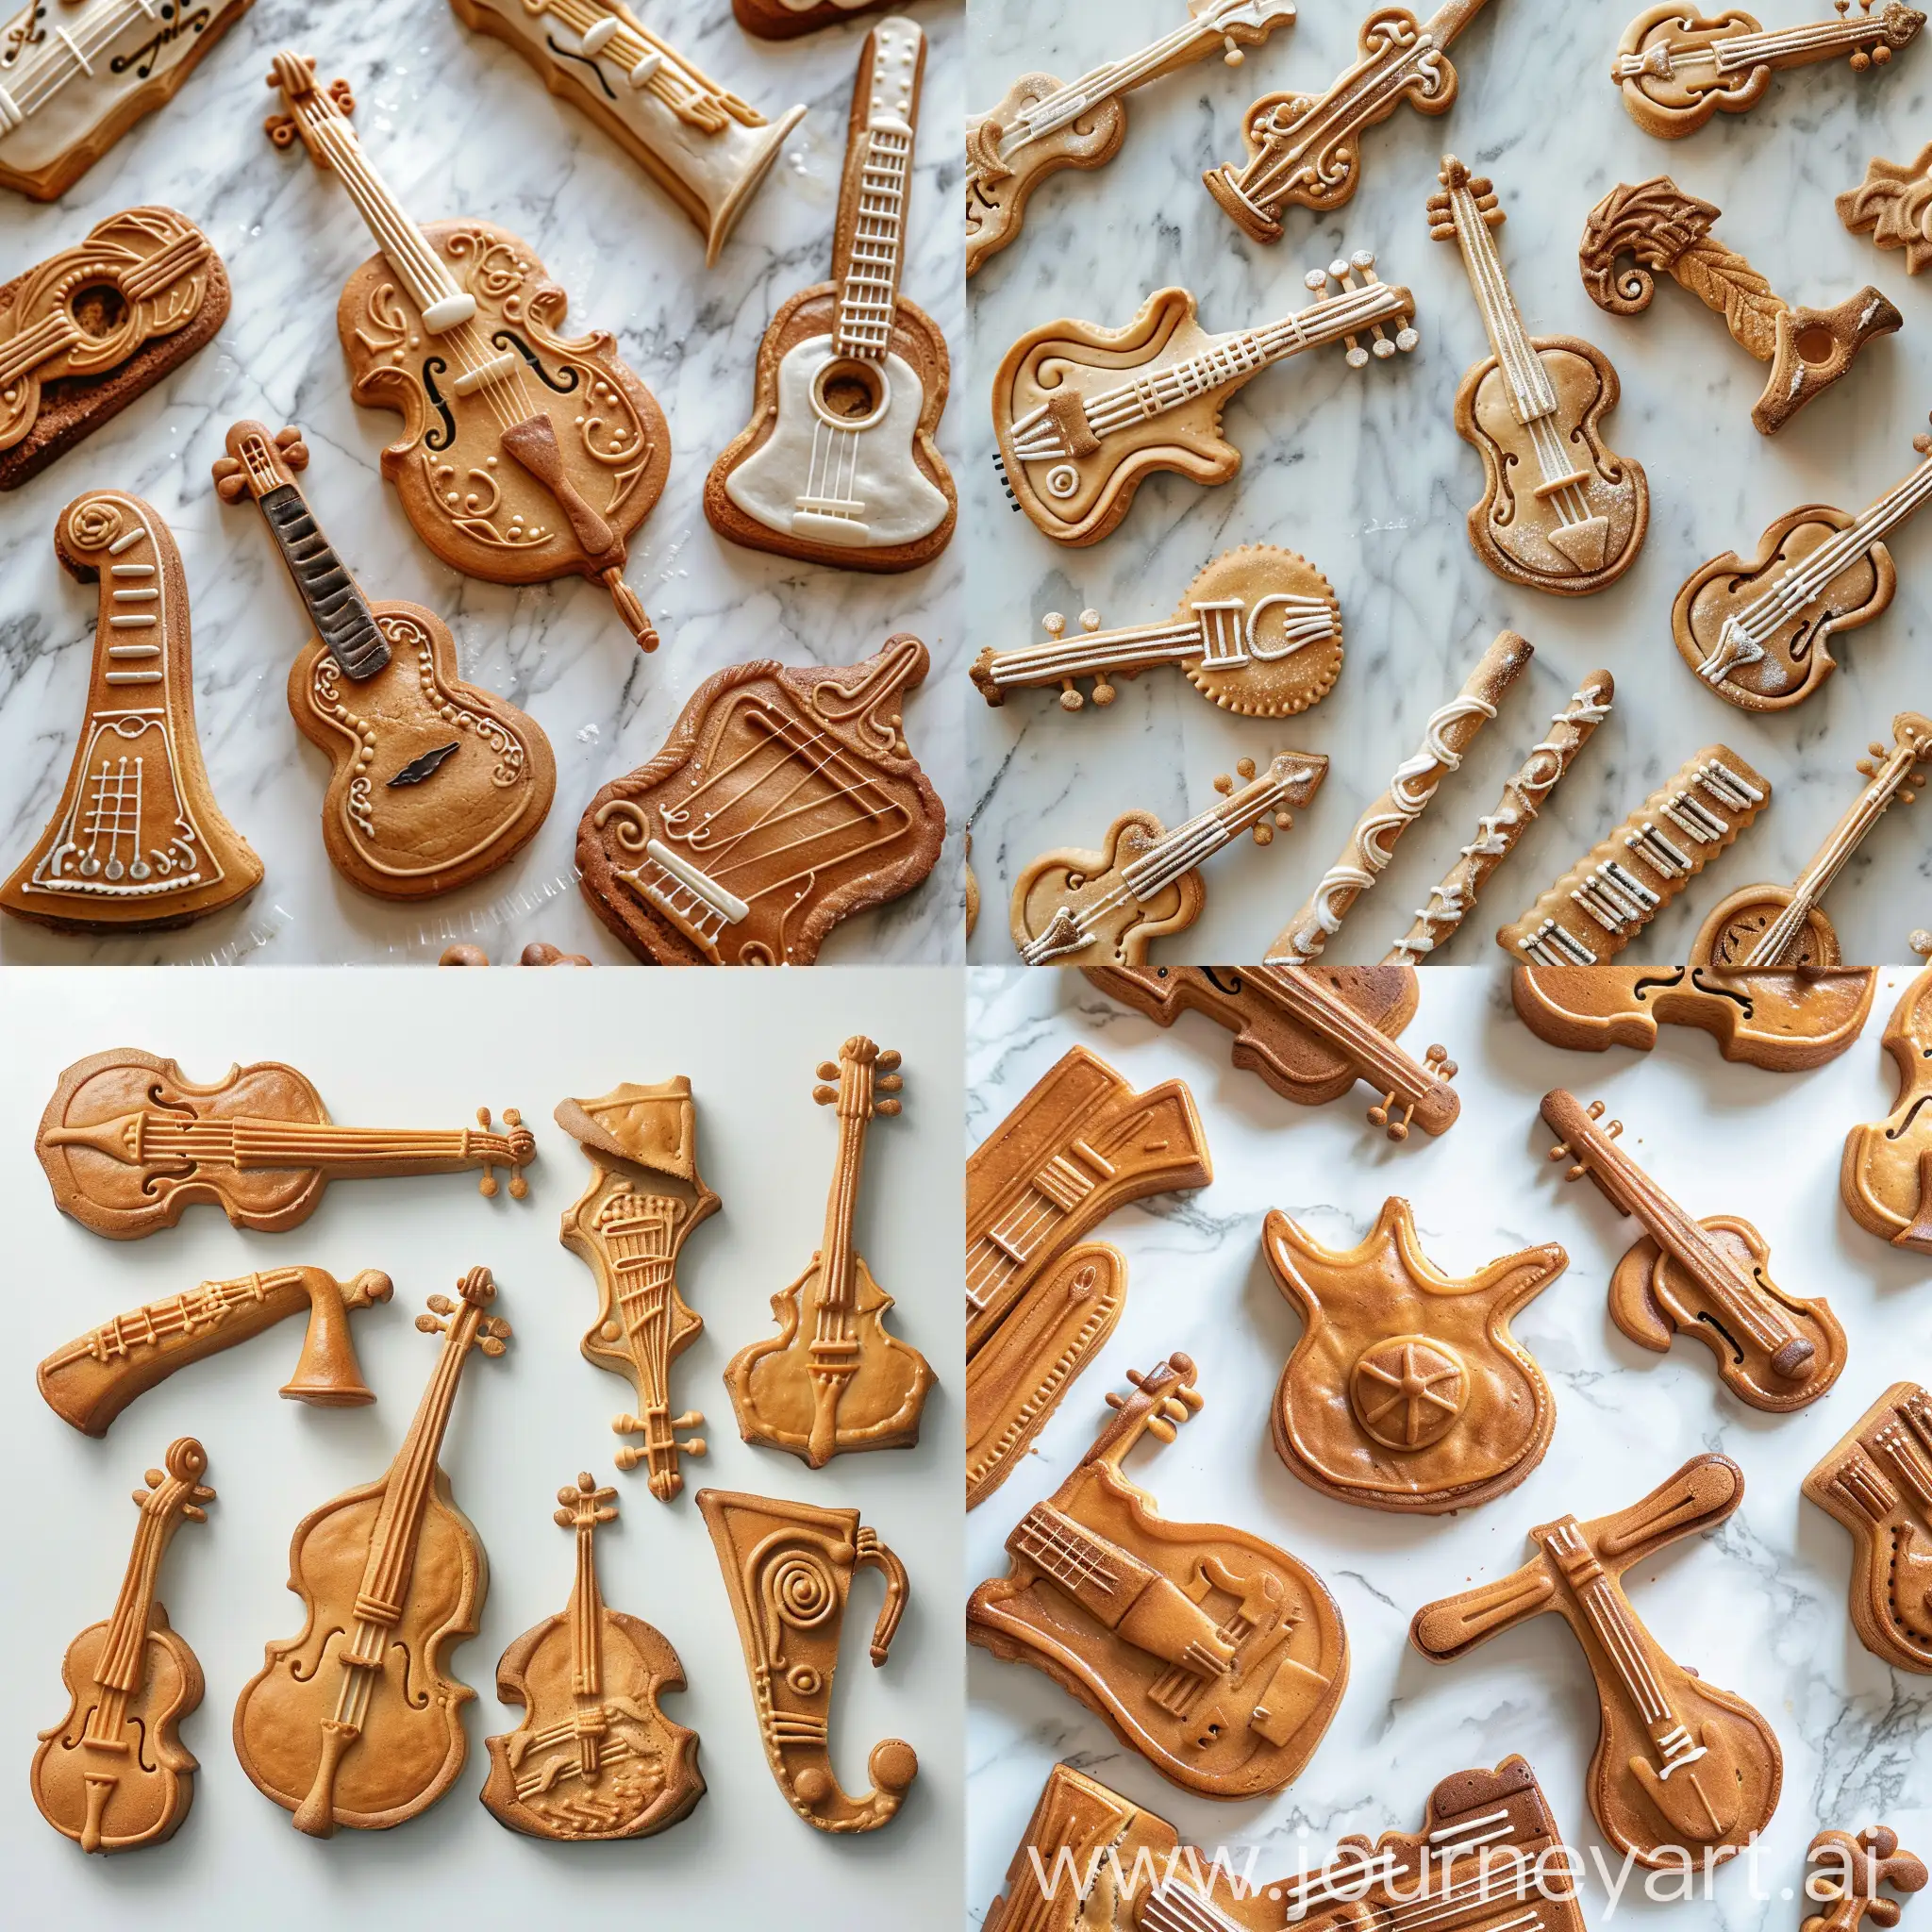 Musical-Instrument-Shaped-Baked-Goods